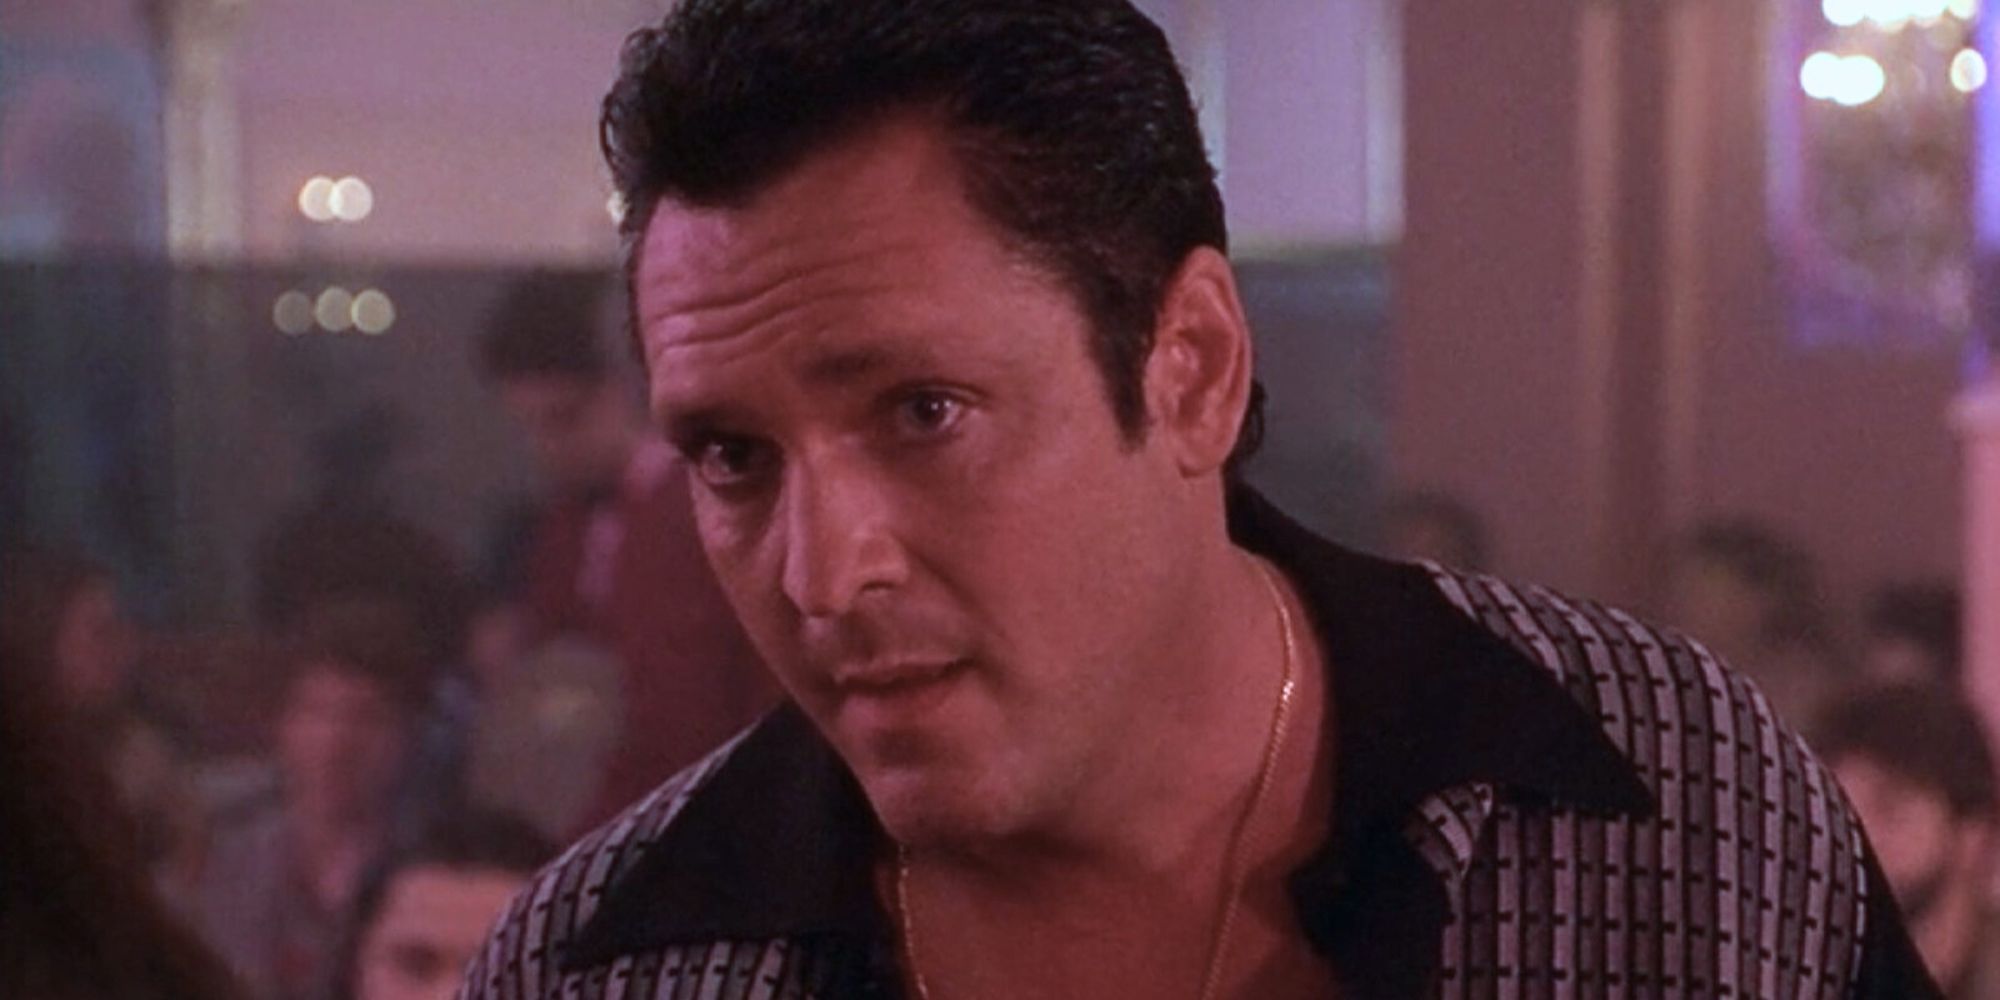 Sonny Black looking intently at someone off-camera in Donnie Brasco (1997)